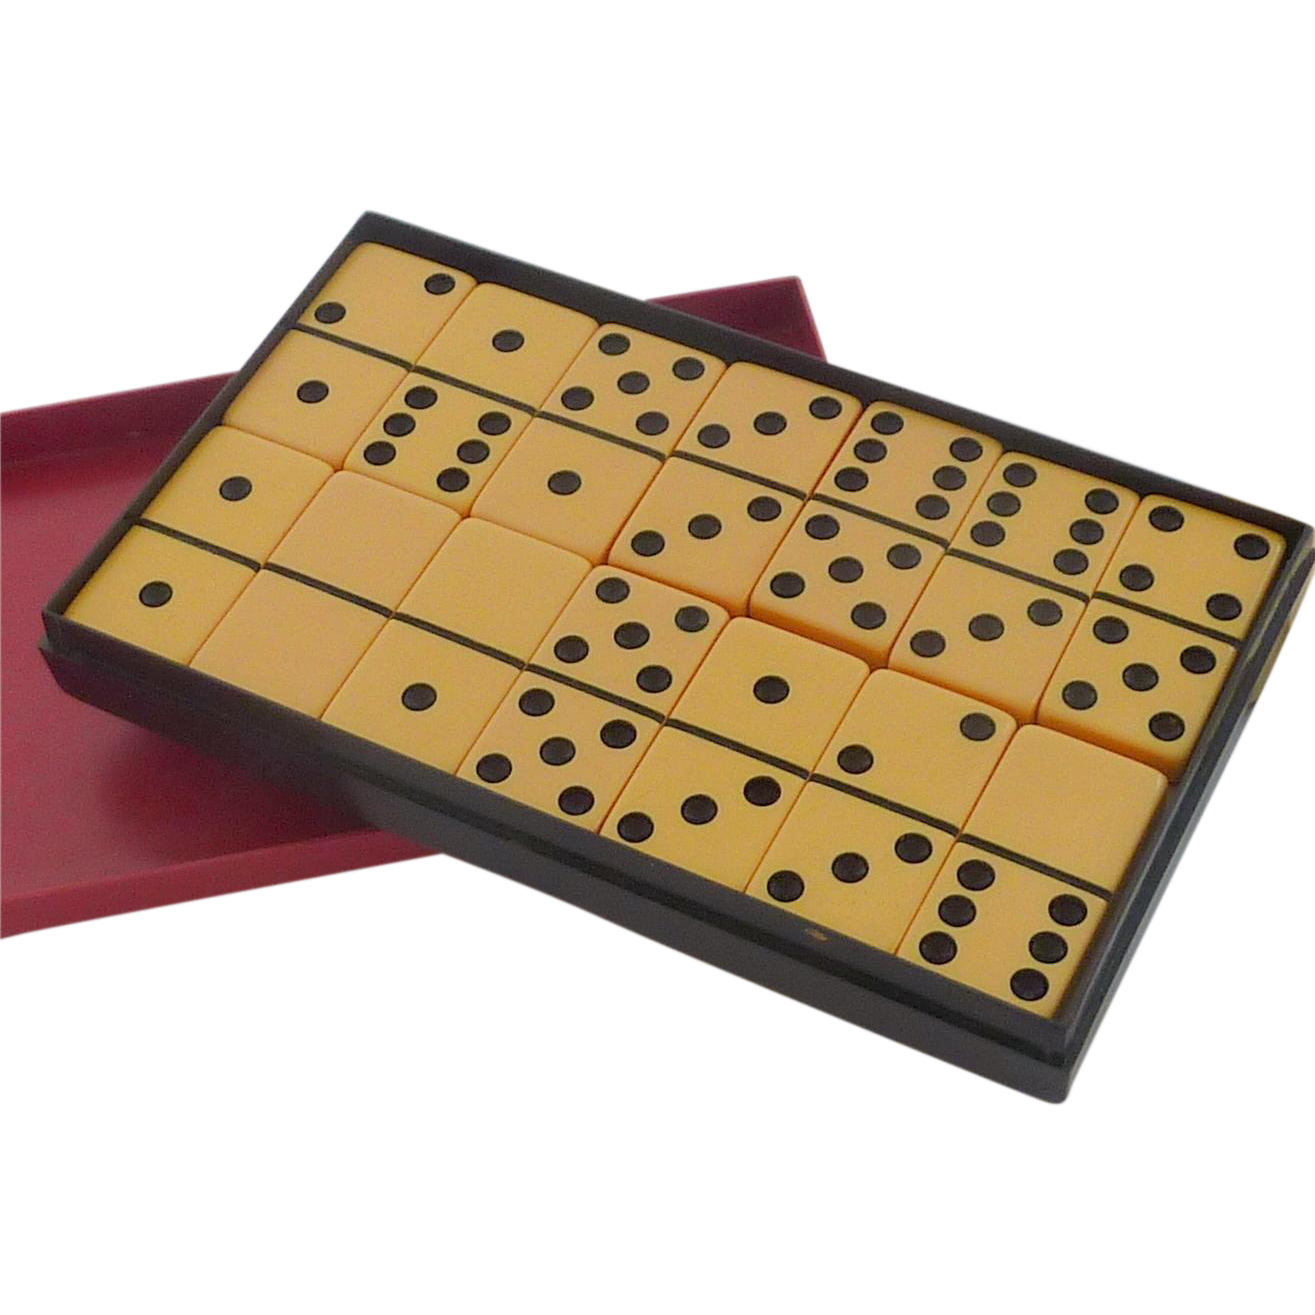 Domino Game Png Images Hd Png Play